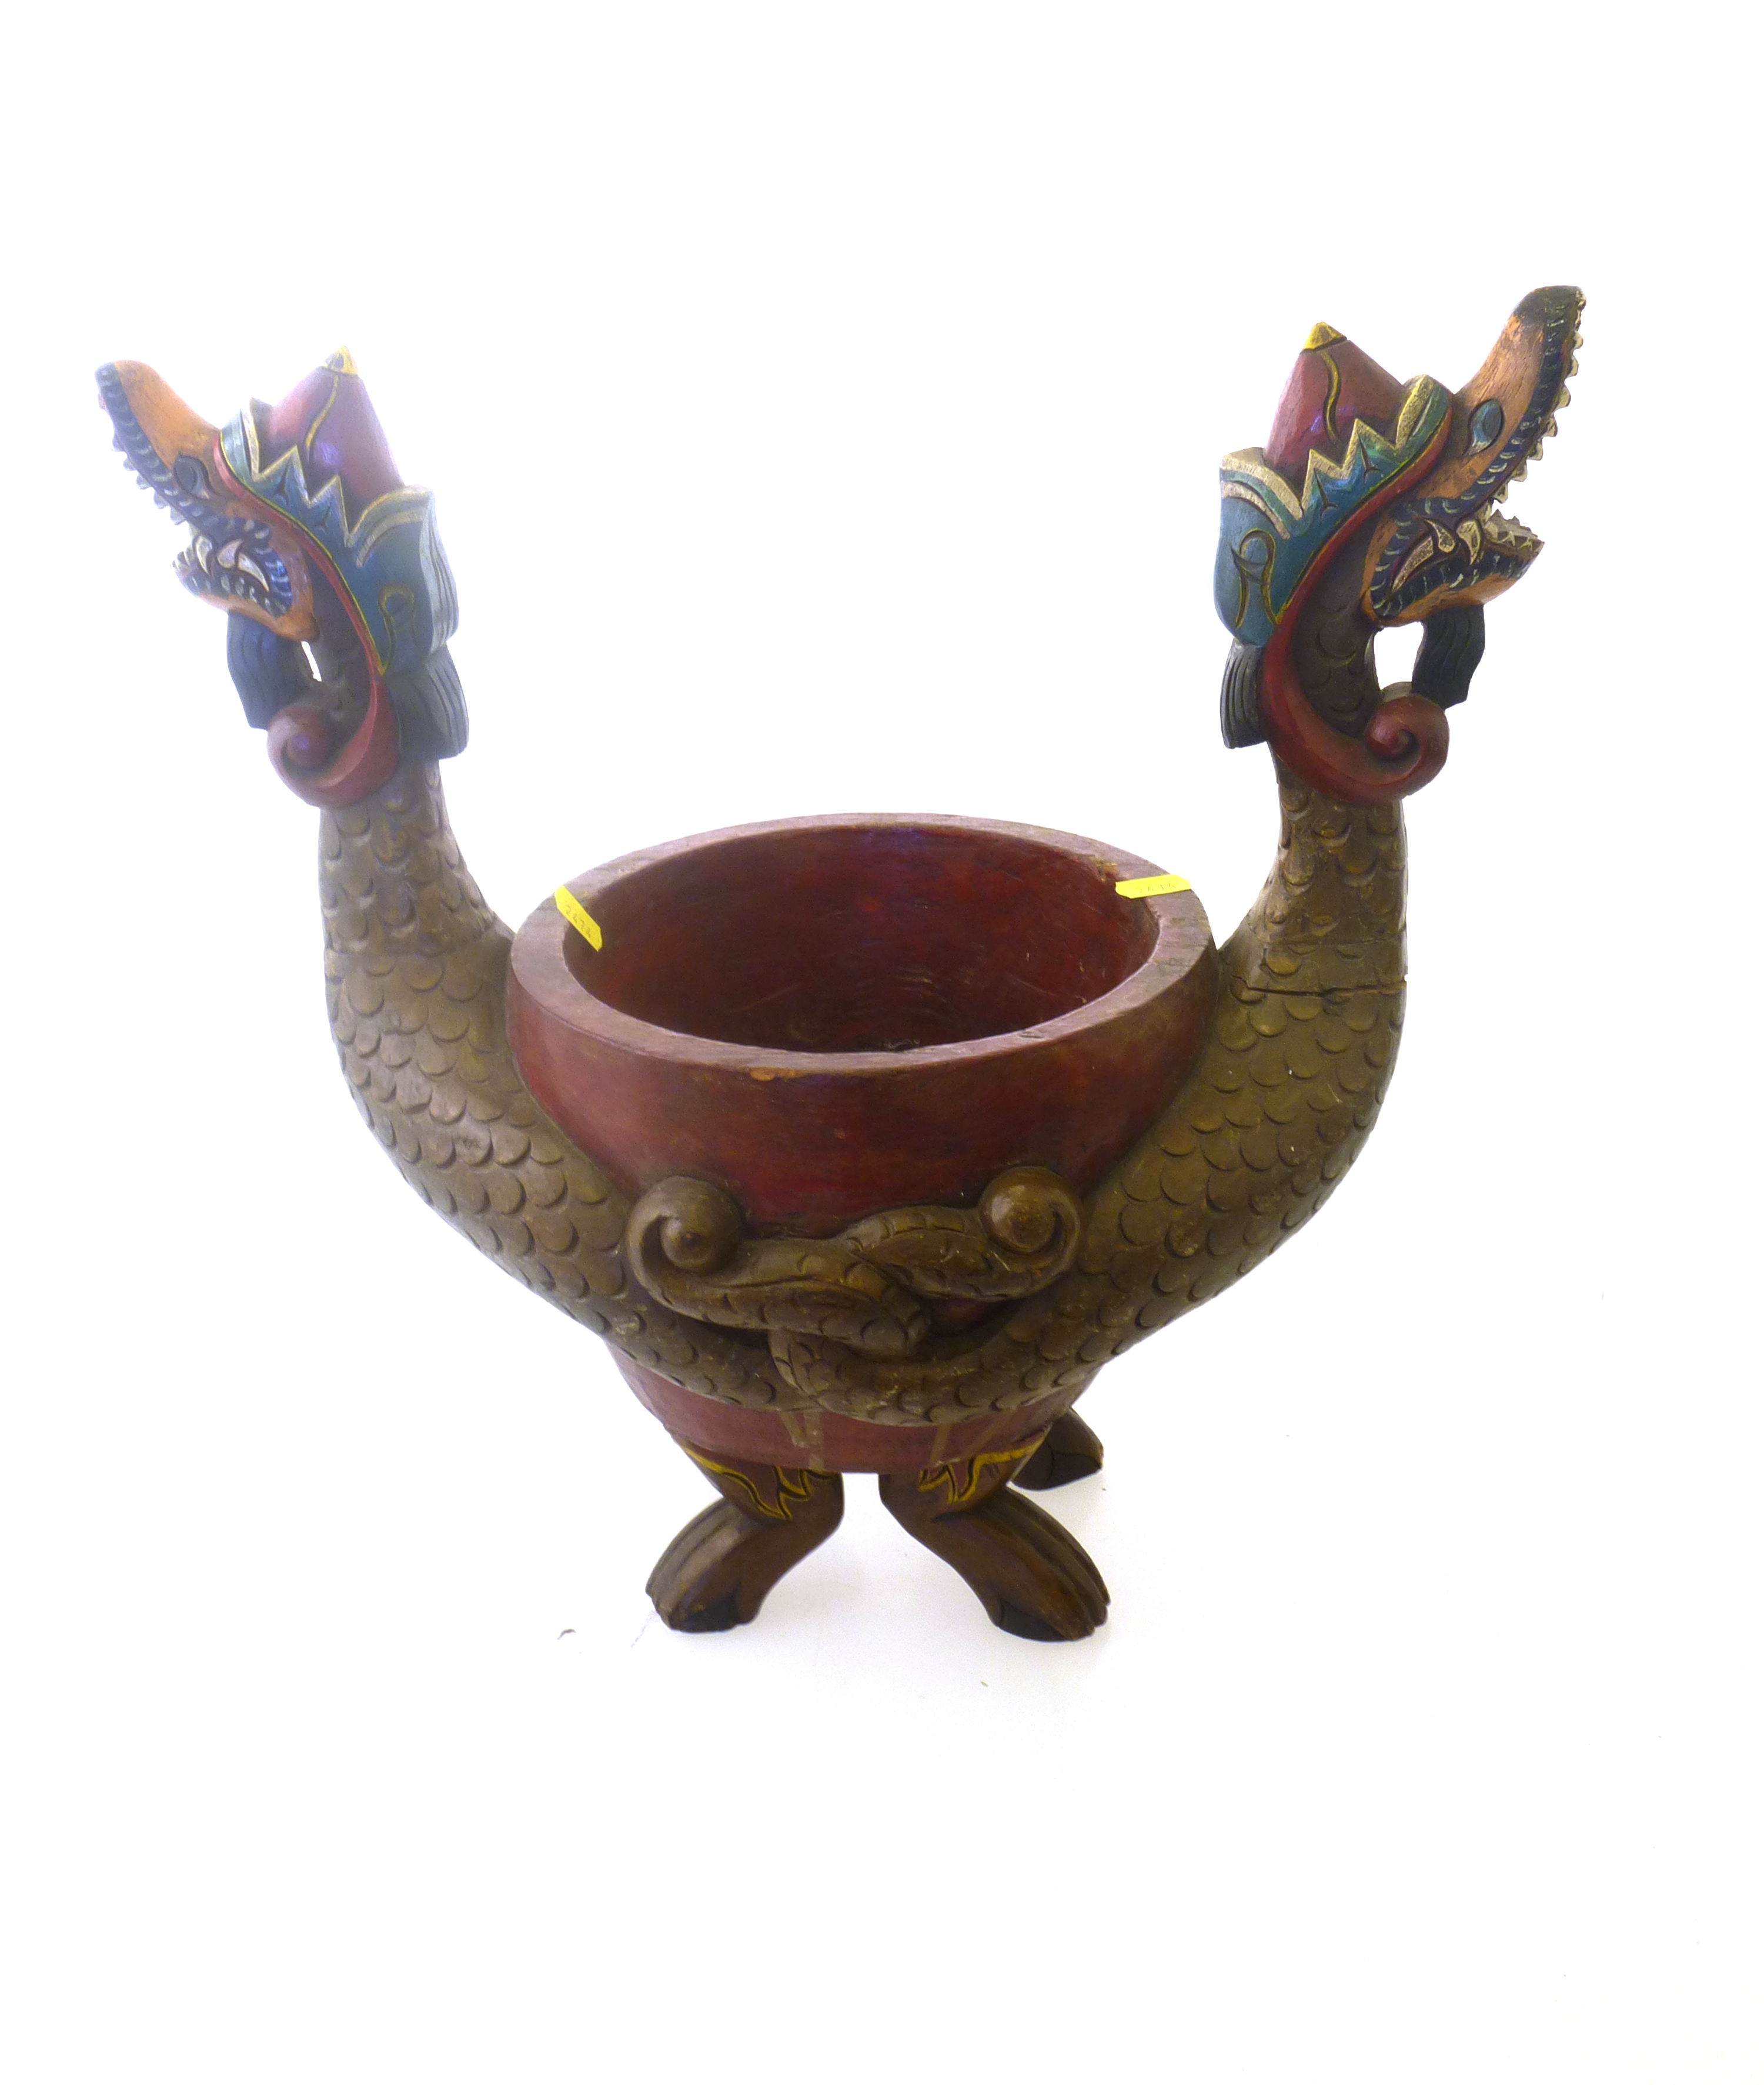 CARVED WOODEN FLOWER POT WITH 2 DRAGON HEADS APPROX H: 16.5" D: 8.5"